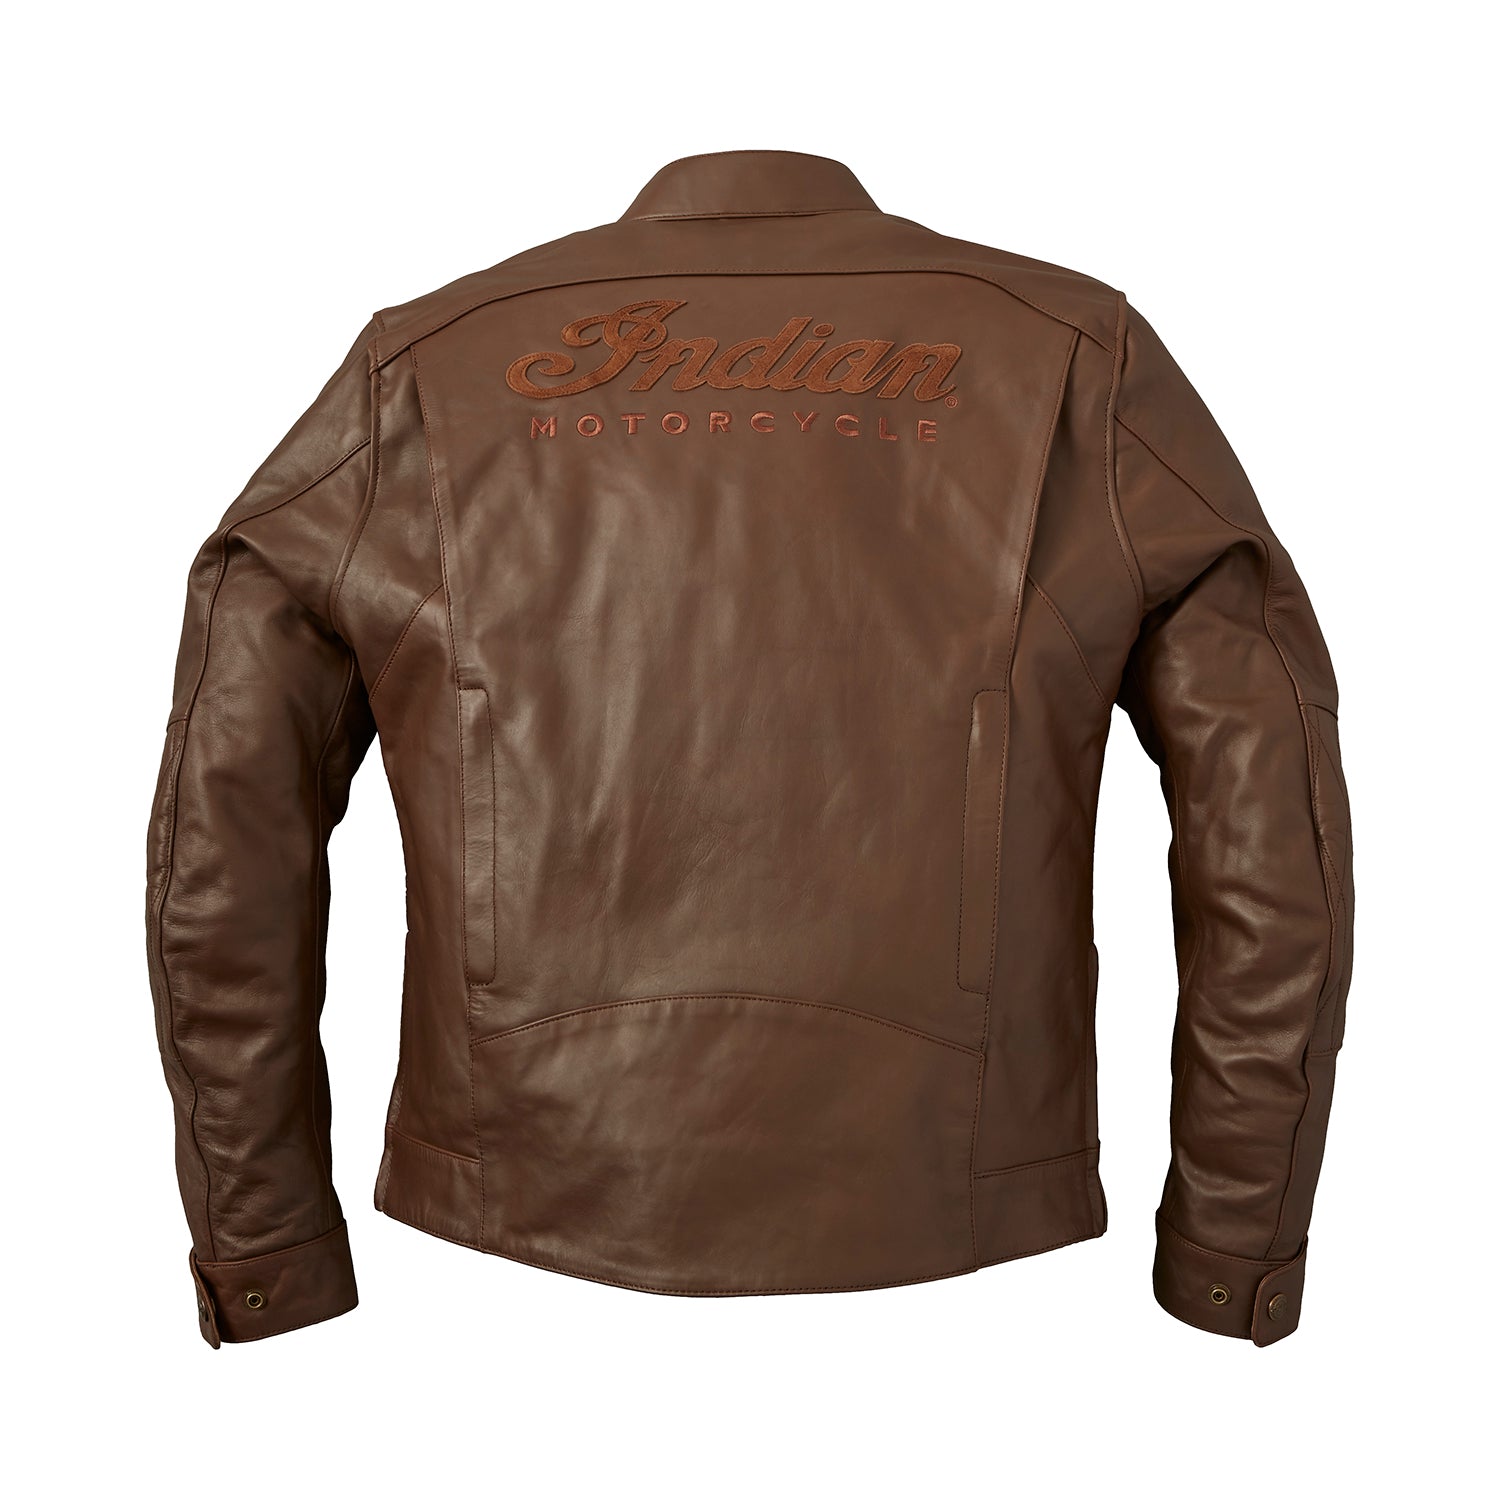 Men's Leather Getaway Riding Jacket with Removable Liner, Brown